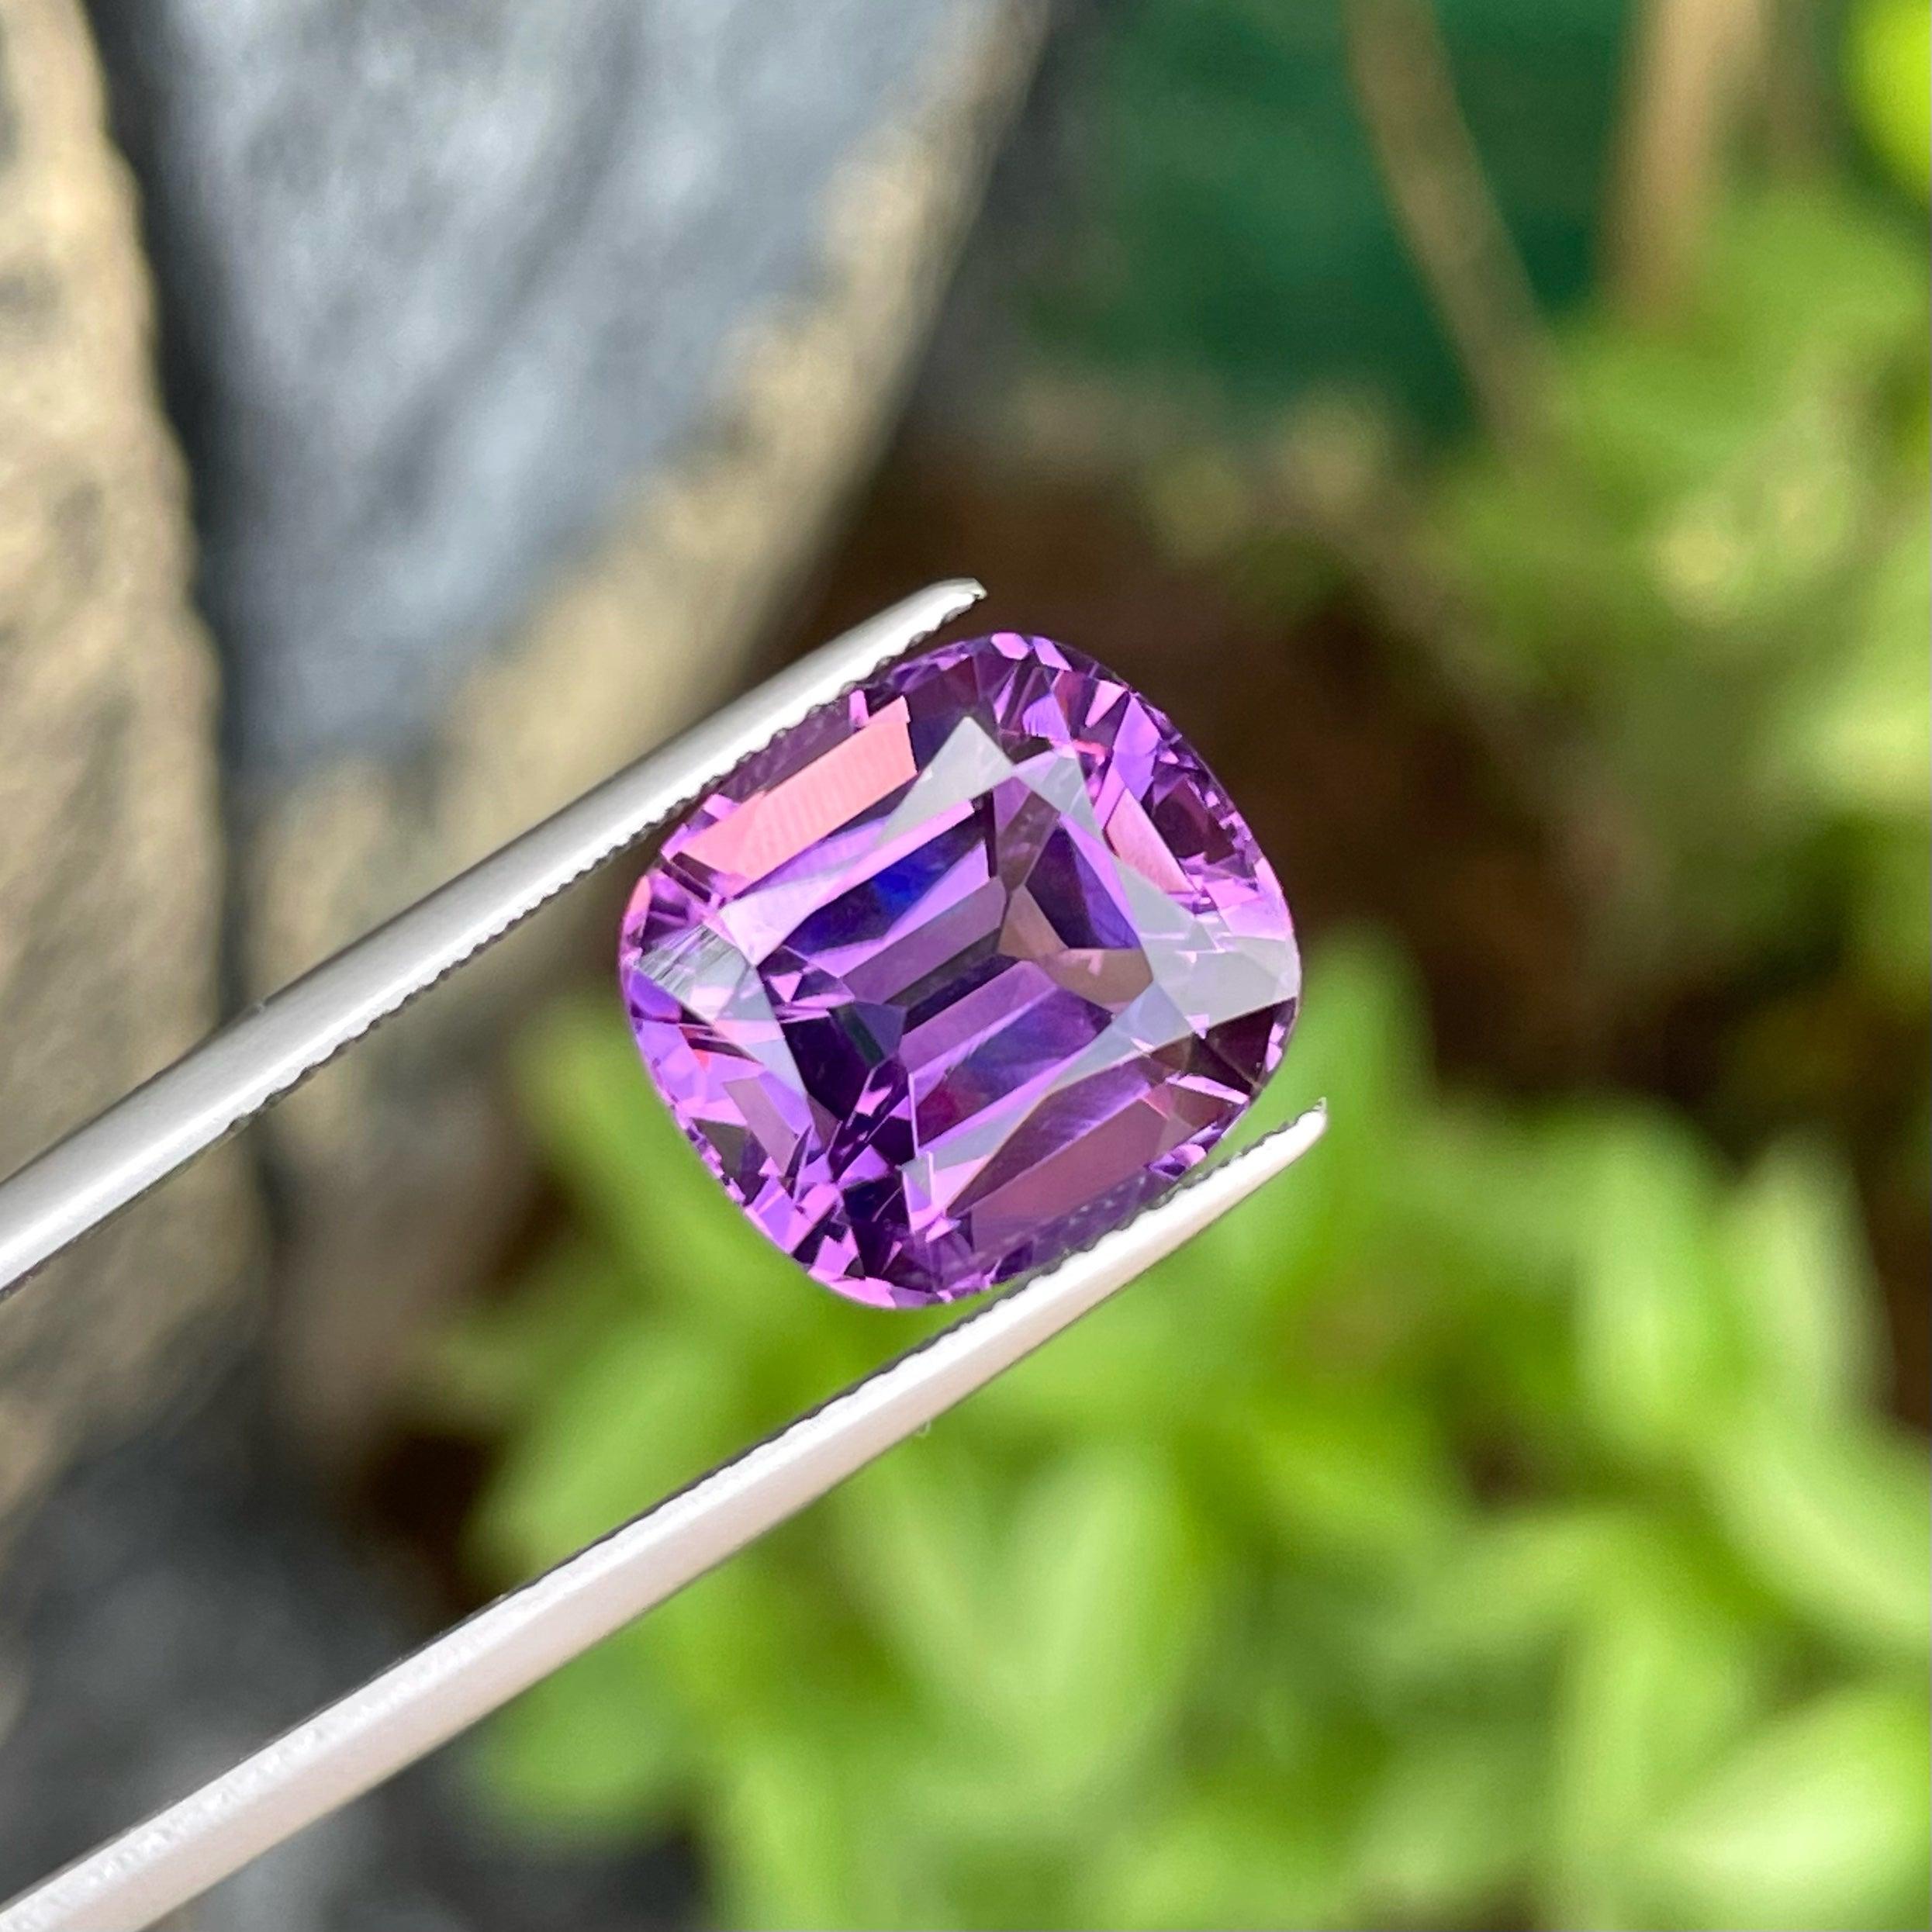 Cushion-Cut Soft Purple Amethyst Gemstone, available for sale, natural high quality flawless 8.16 carats, cushion cut amethyst from Brazil.

 Product Information:
GEMSTONE TYPE	Cushion-Cut Soft Purple Amethyst Gemstone
WEIGHT	8.16